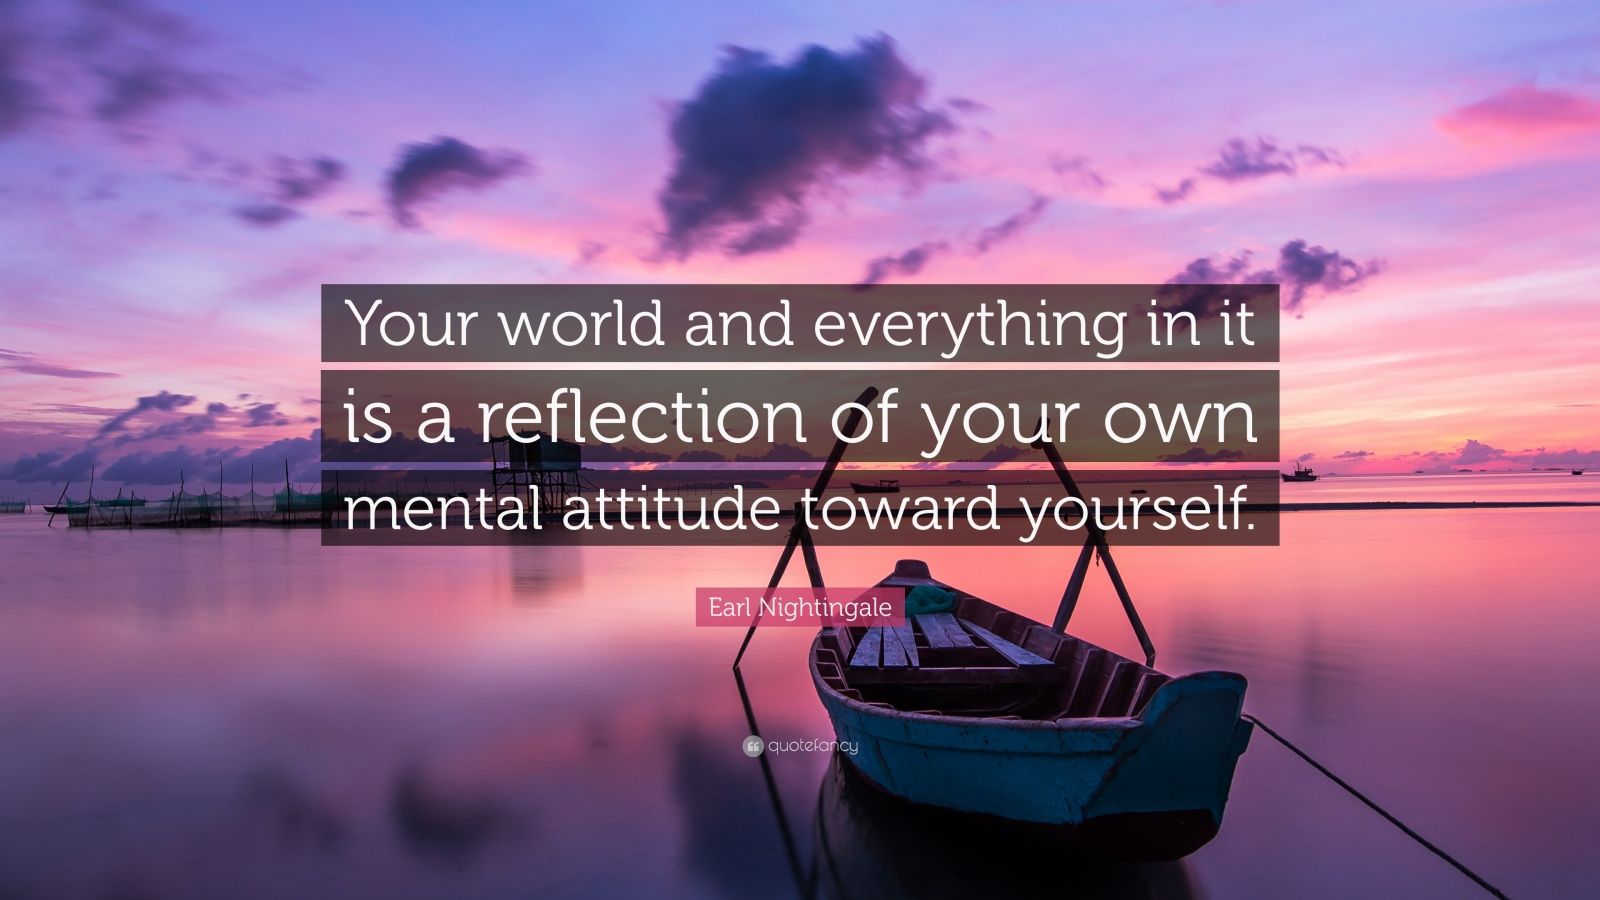 Earl Nightingale Quote: “Your world and everything in it is a